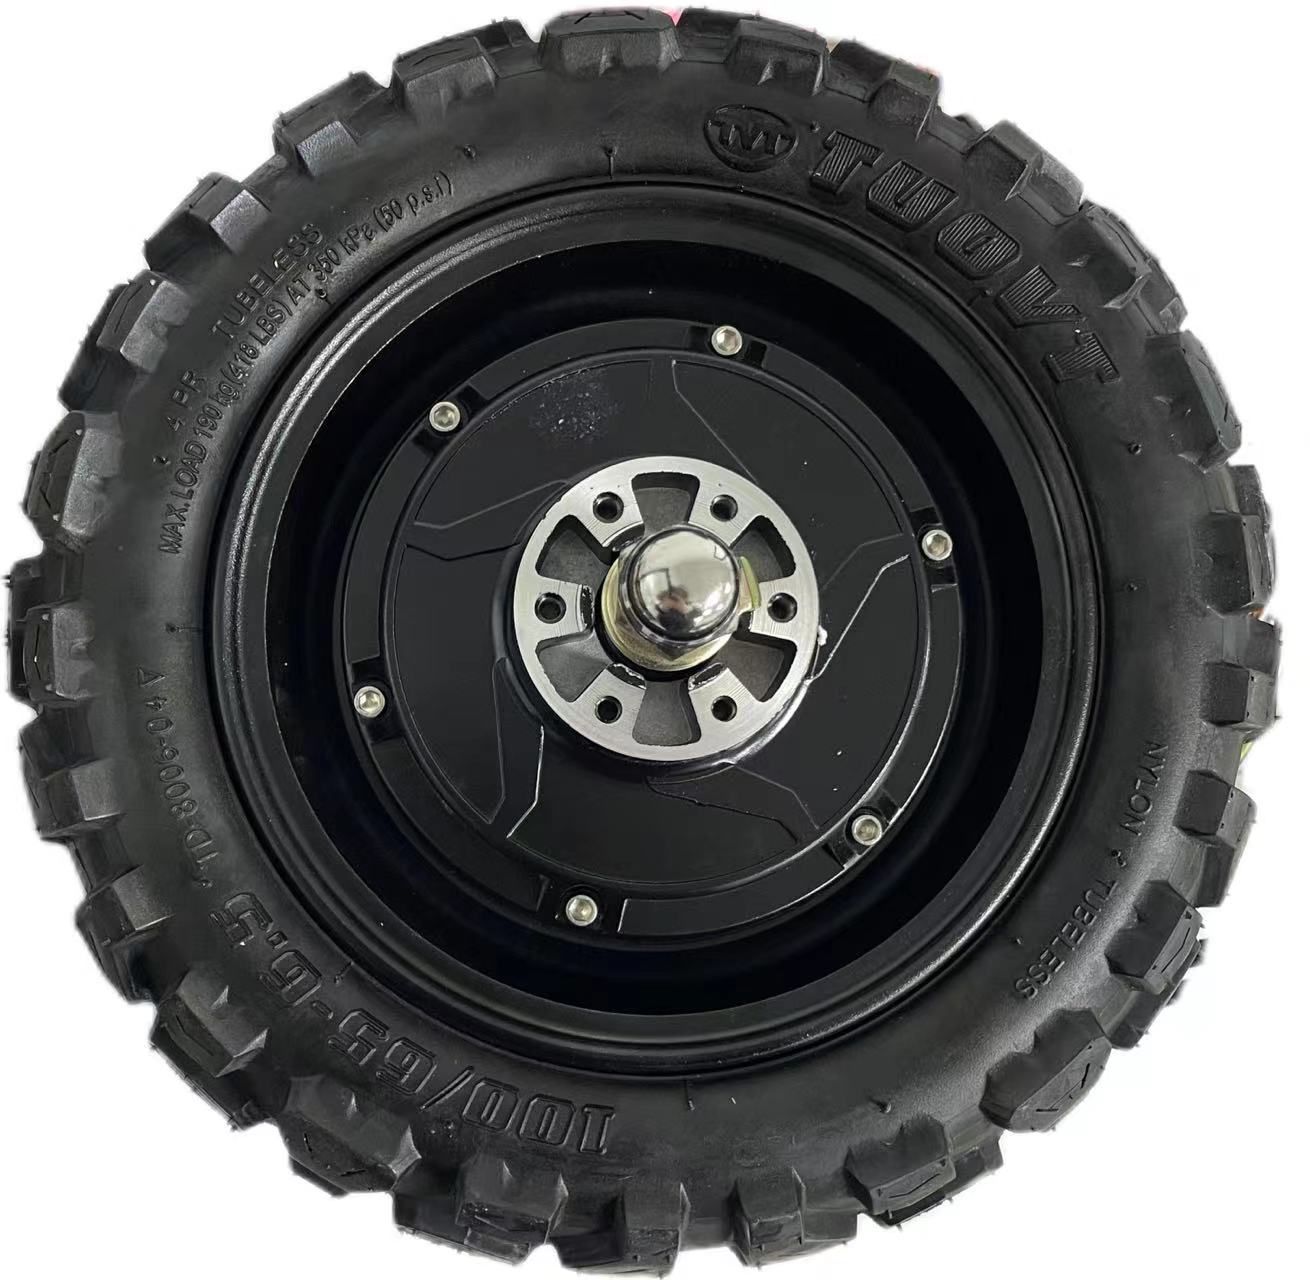 800-1200w motor with 10/11inch tyre